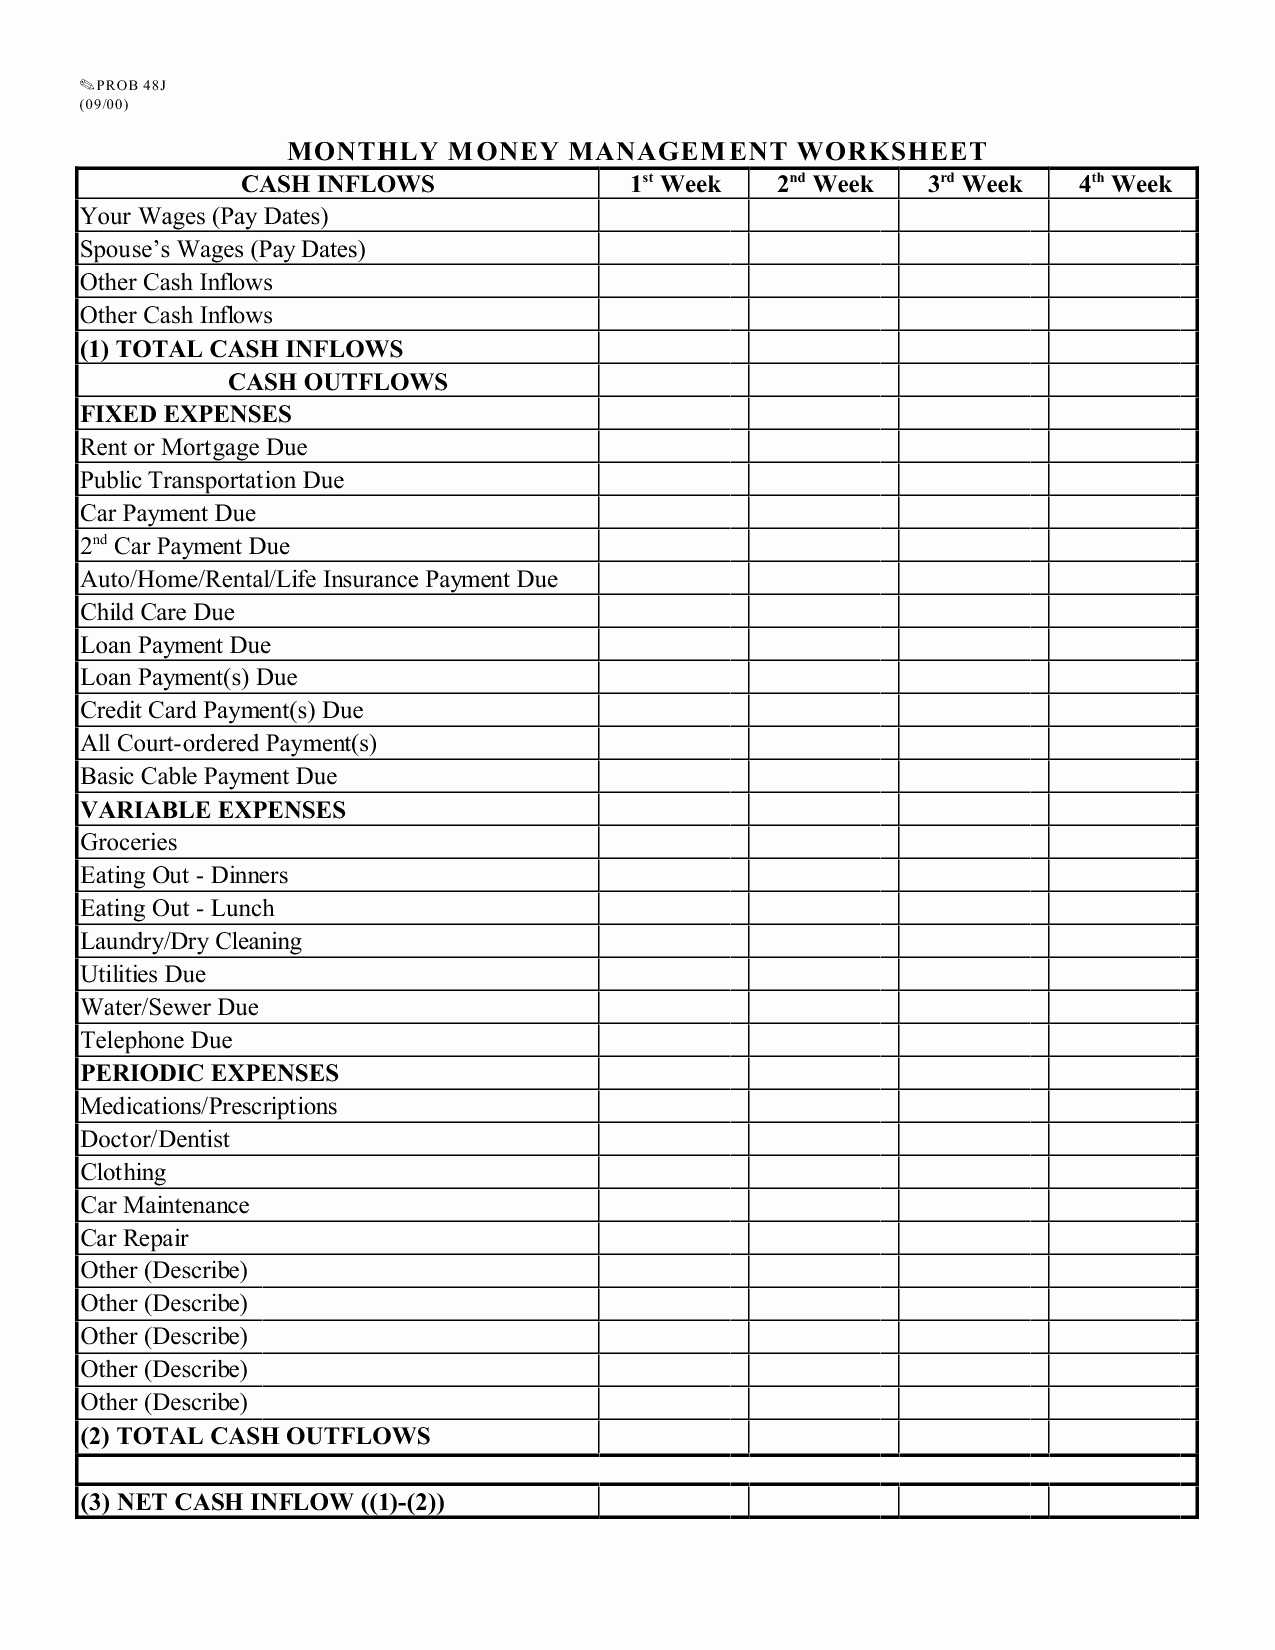 Free Printable Budget Binder Worksheets as Well as How to Bud and Save Money Spreadsheet for How to Bud Money Worksheet